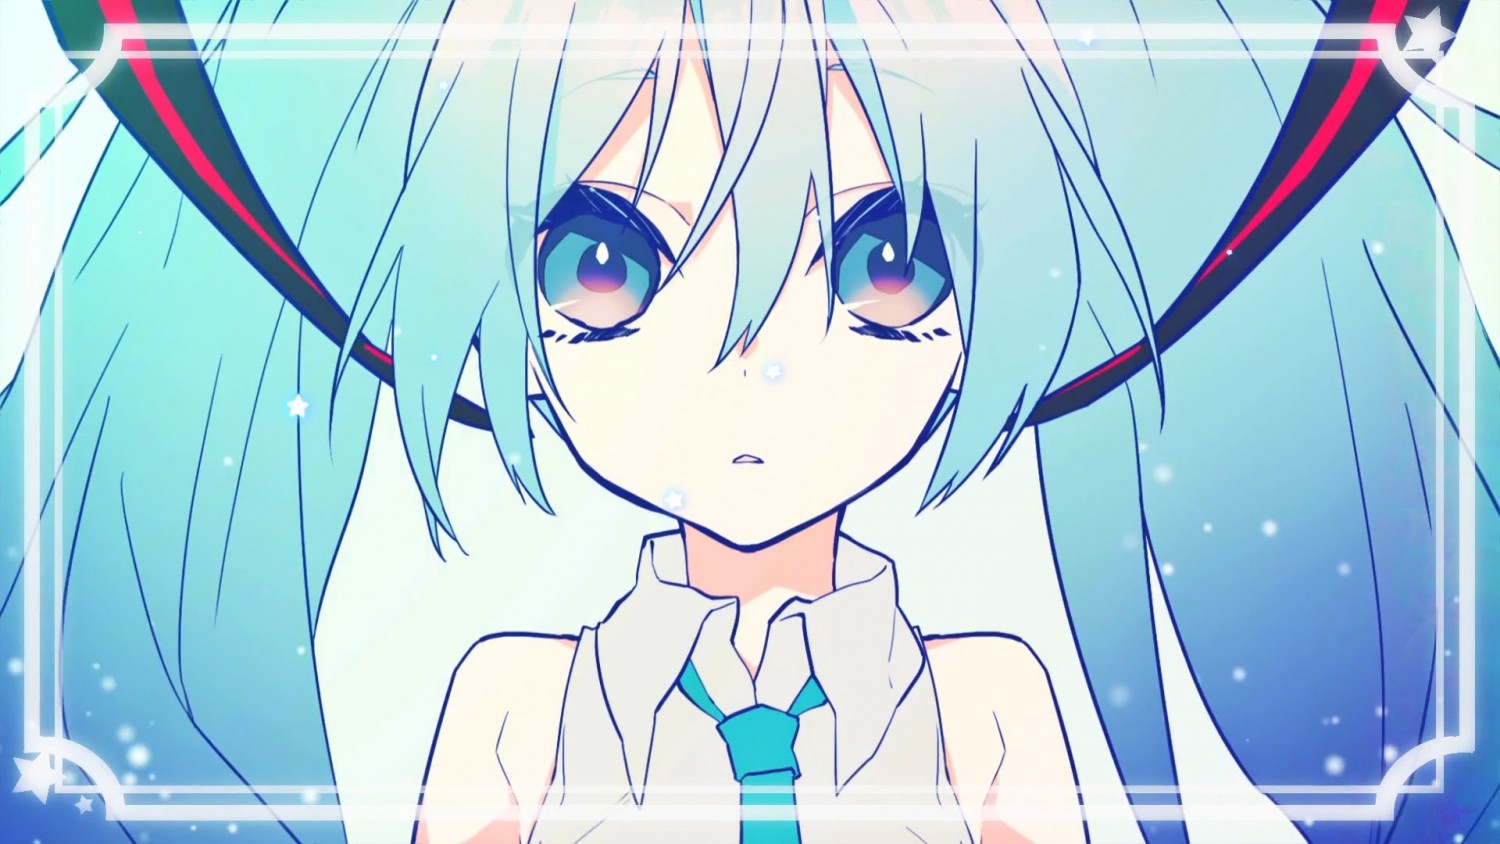 HATSUNE MIKU EXPO 2016’s Theme Song “Blue Star” Created by Hachioji-P, MV is Now Available!!